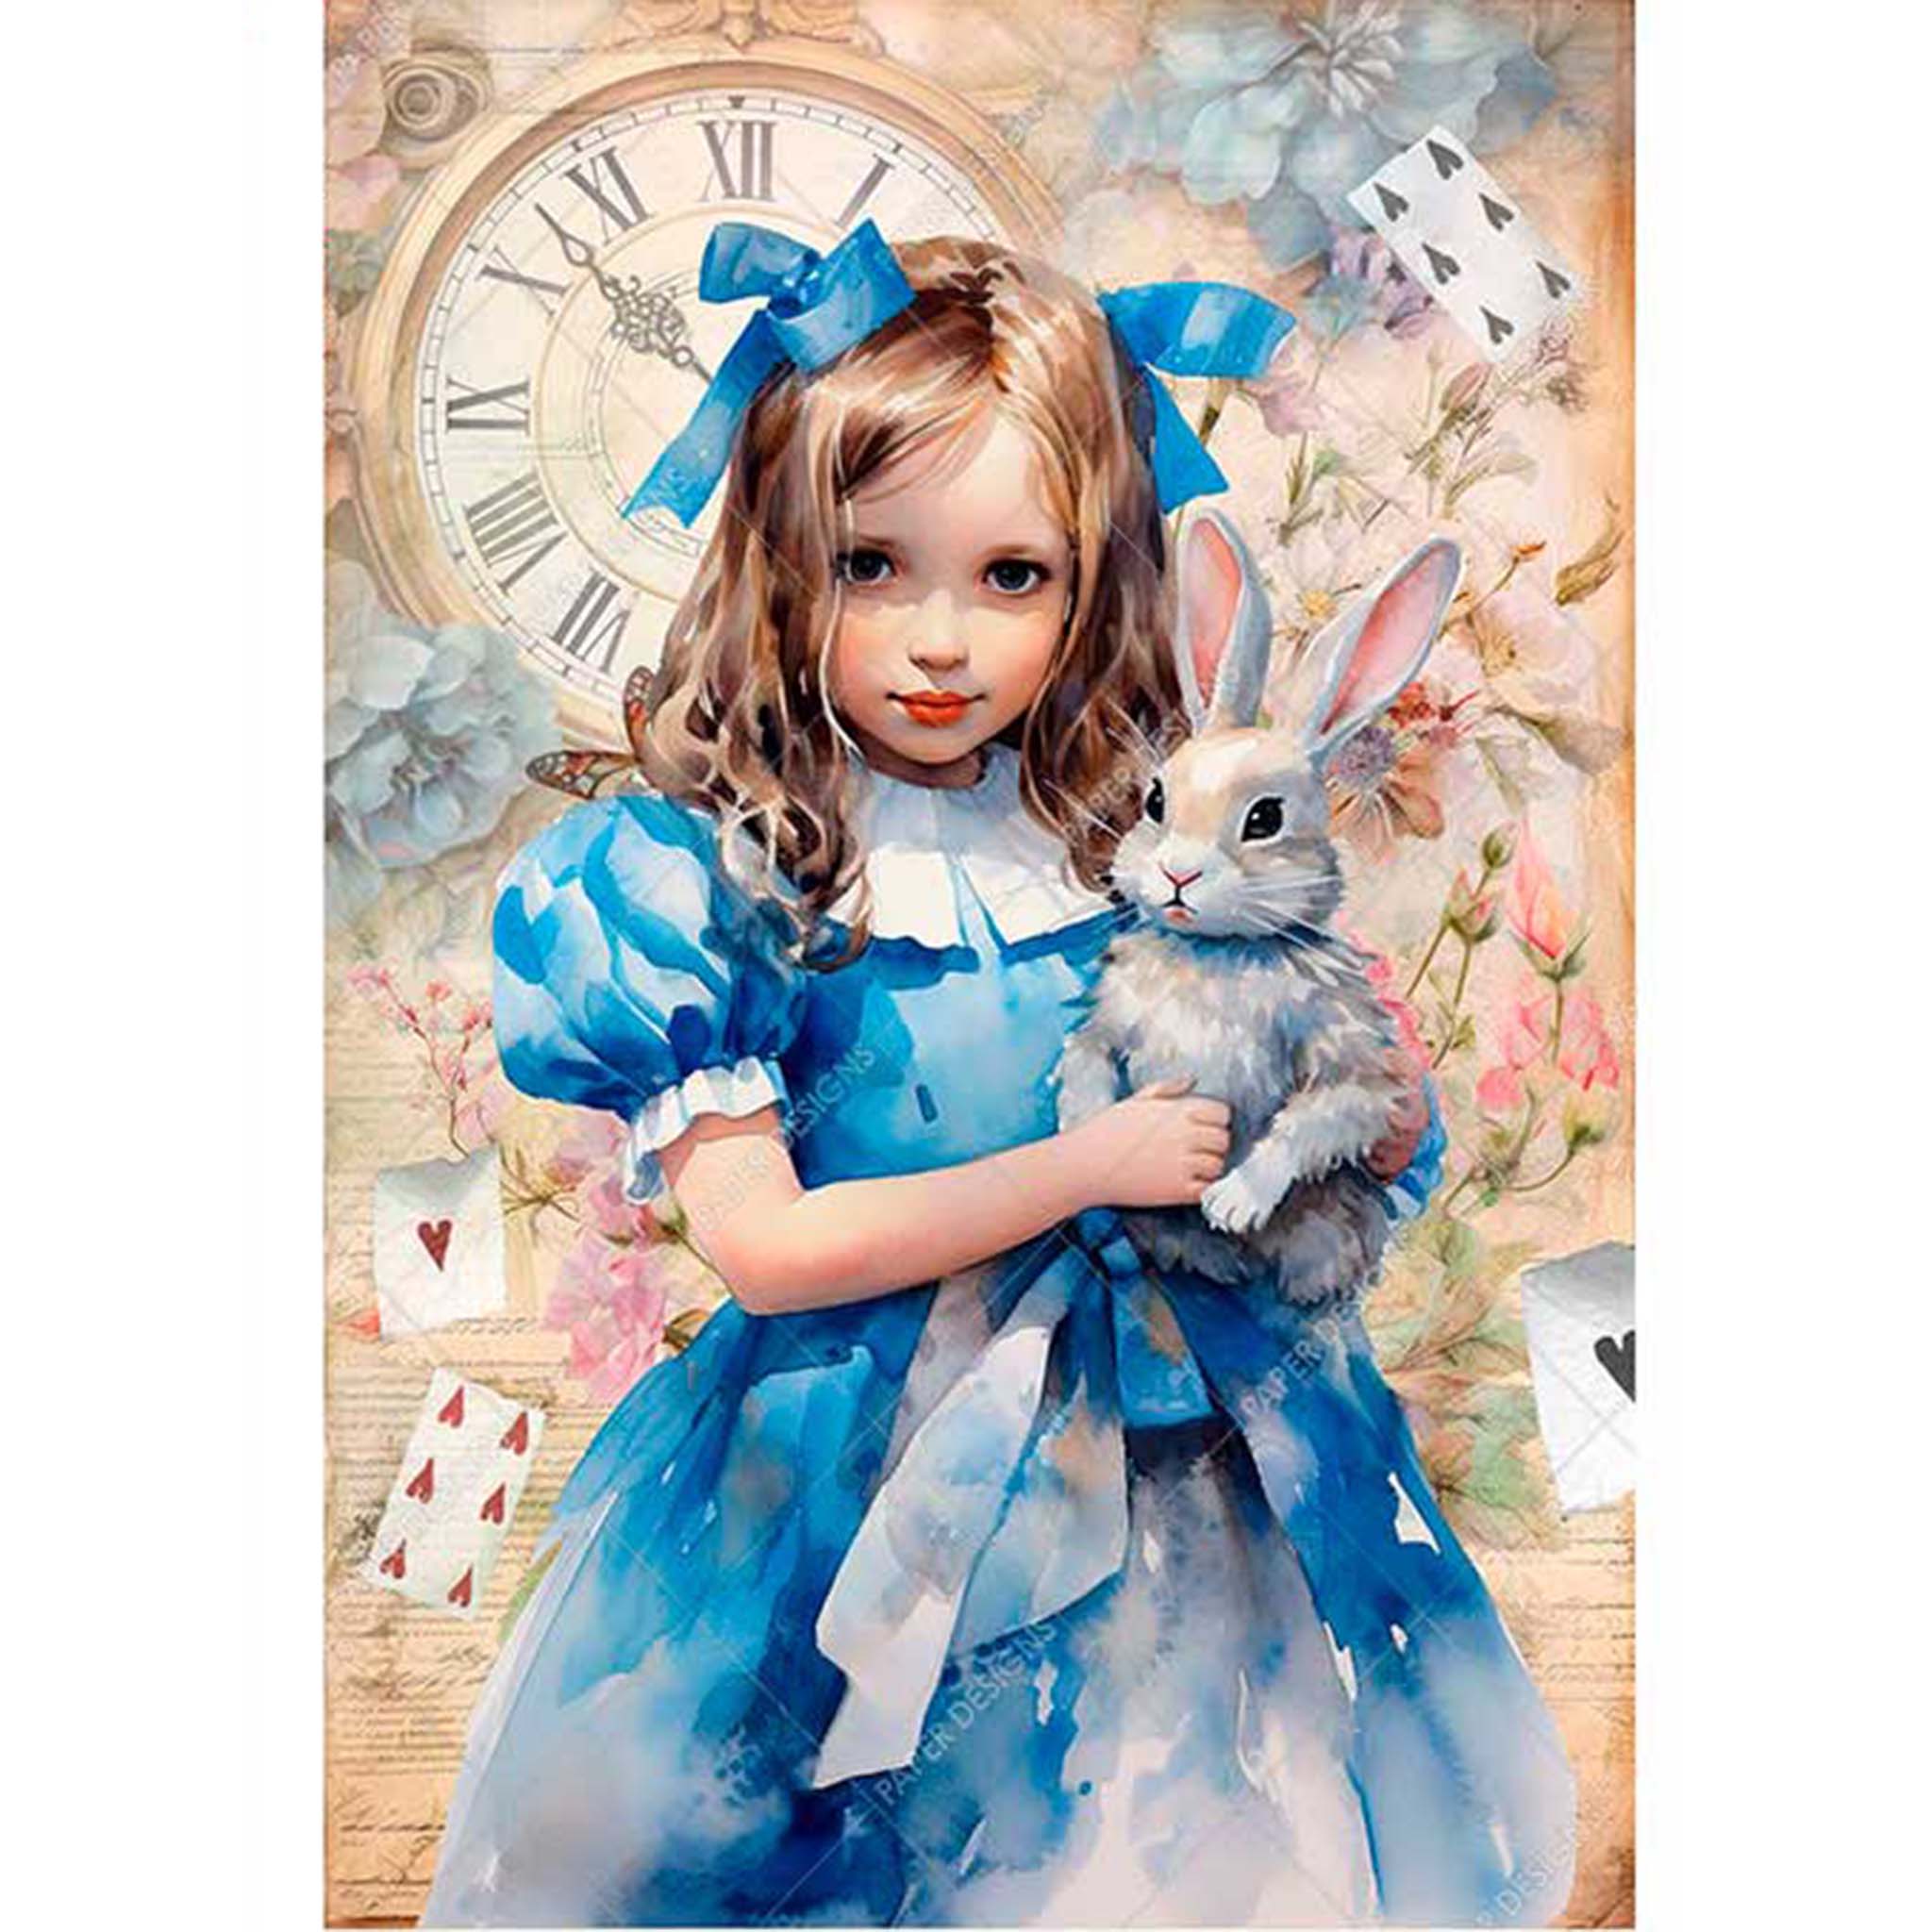 A1 rice paper design featuring a young Alice holding a white rabbit in front of a background filled with Alice In Wonderland themed items. White borders are on the sides.